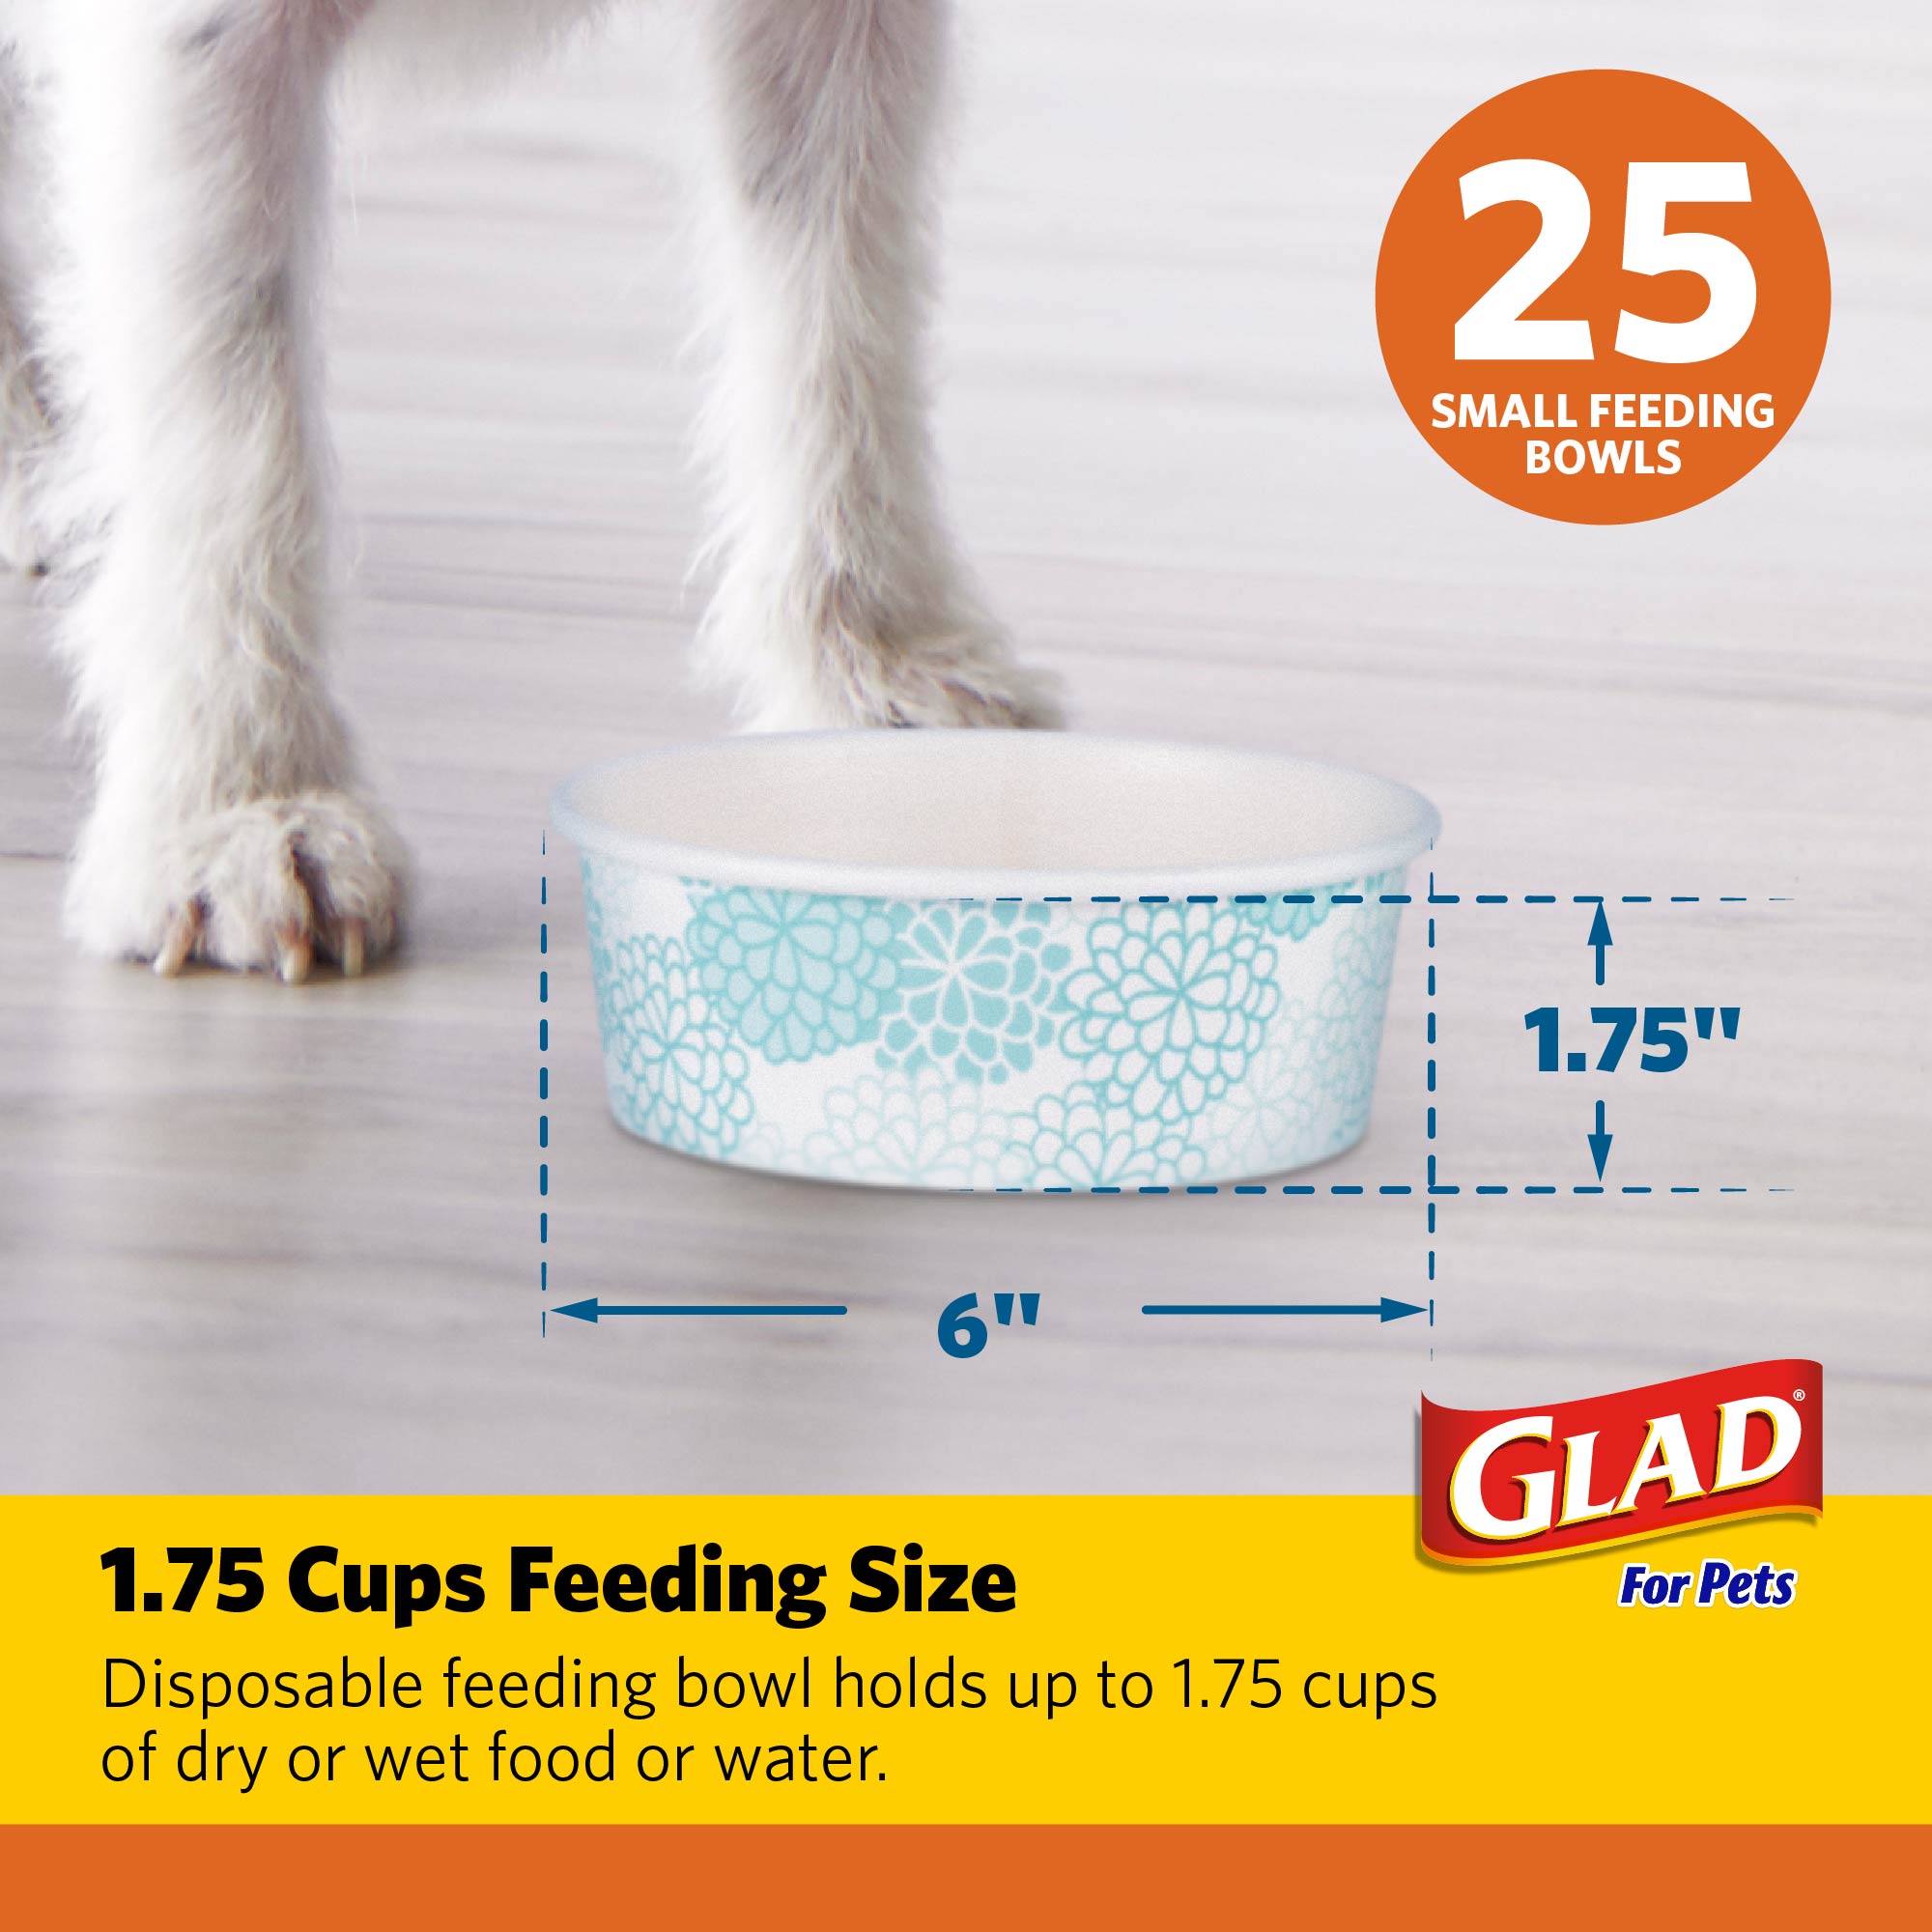 Glad for Pets Disposable Feeding Bowls (3.5 cup size / 25 Count) – Fetch  for Pets